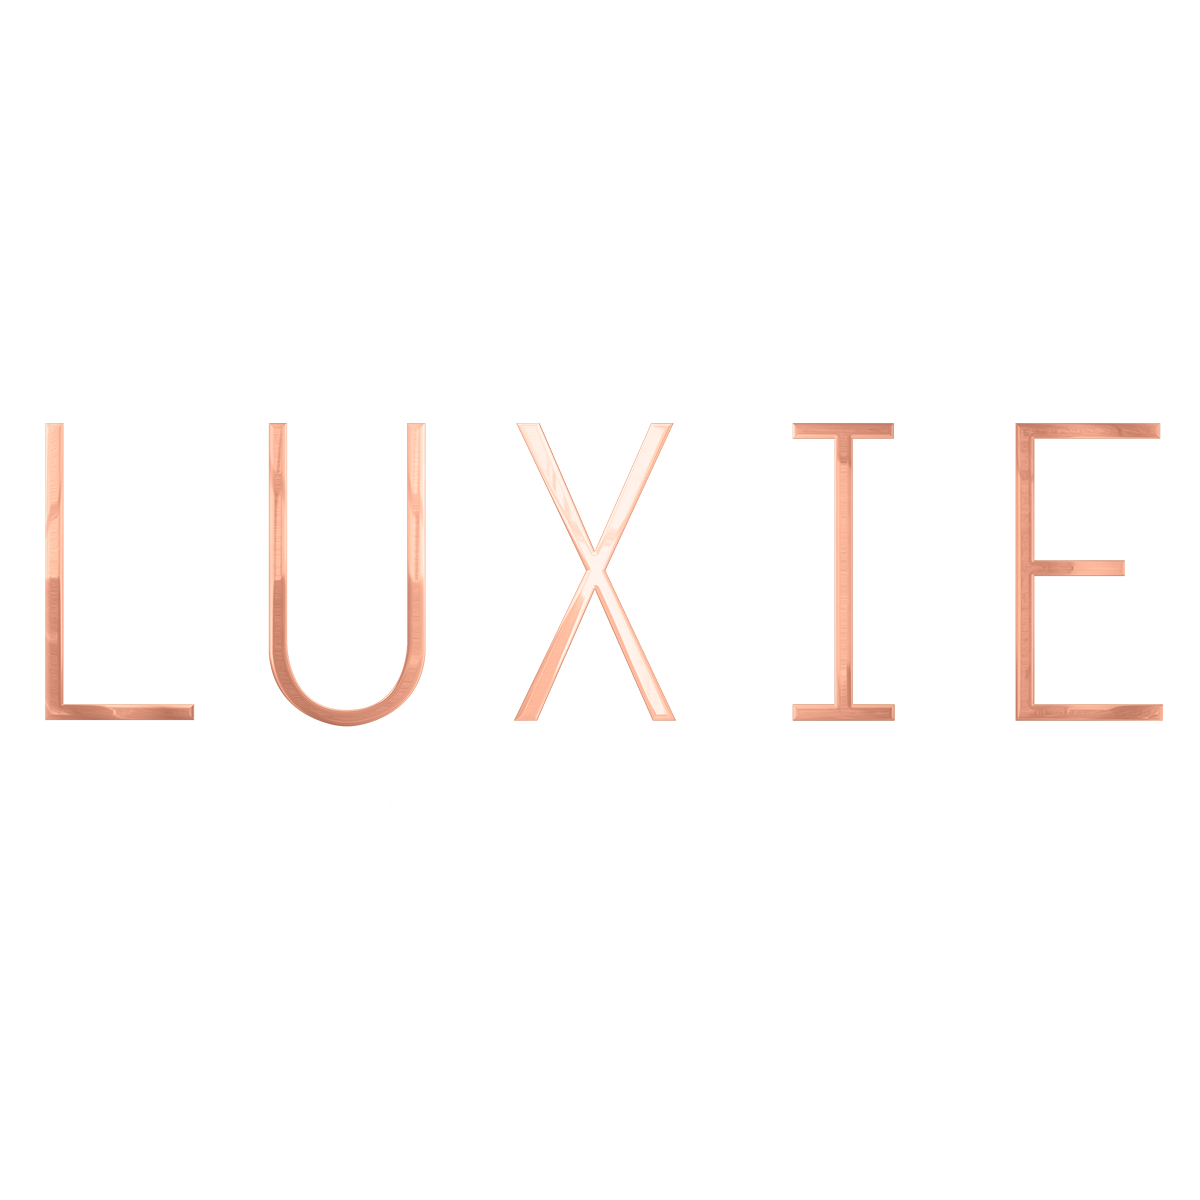 Luxie 